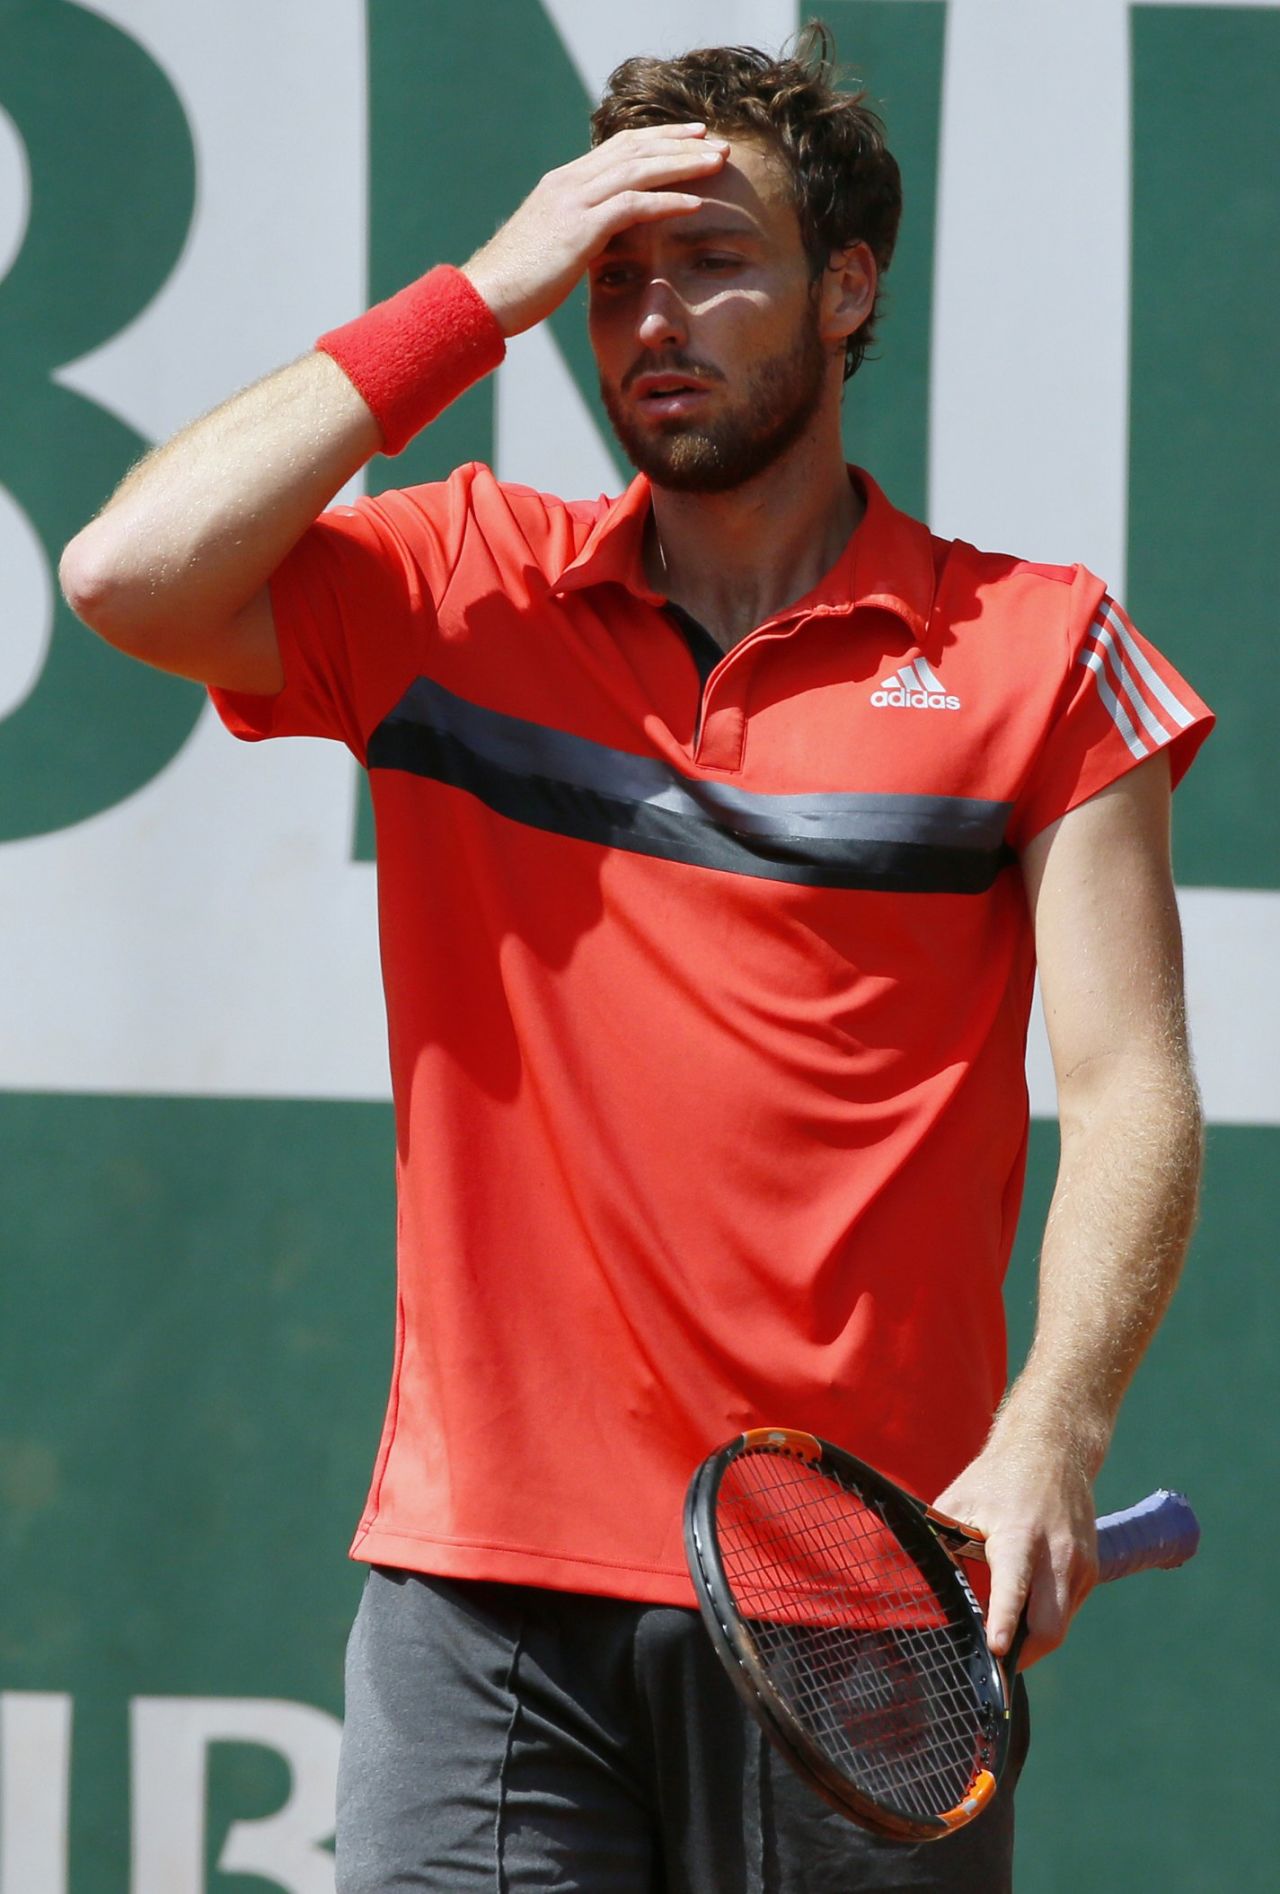 The enigmatic Gulbis slipped to 3-13 in 2015 after a fine 2014. 